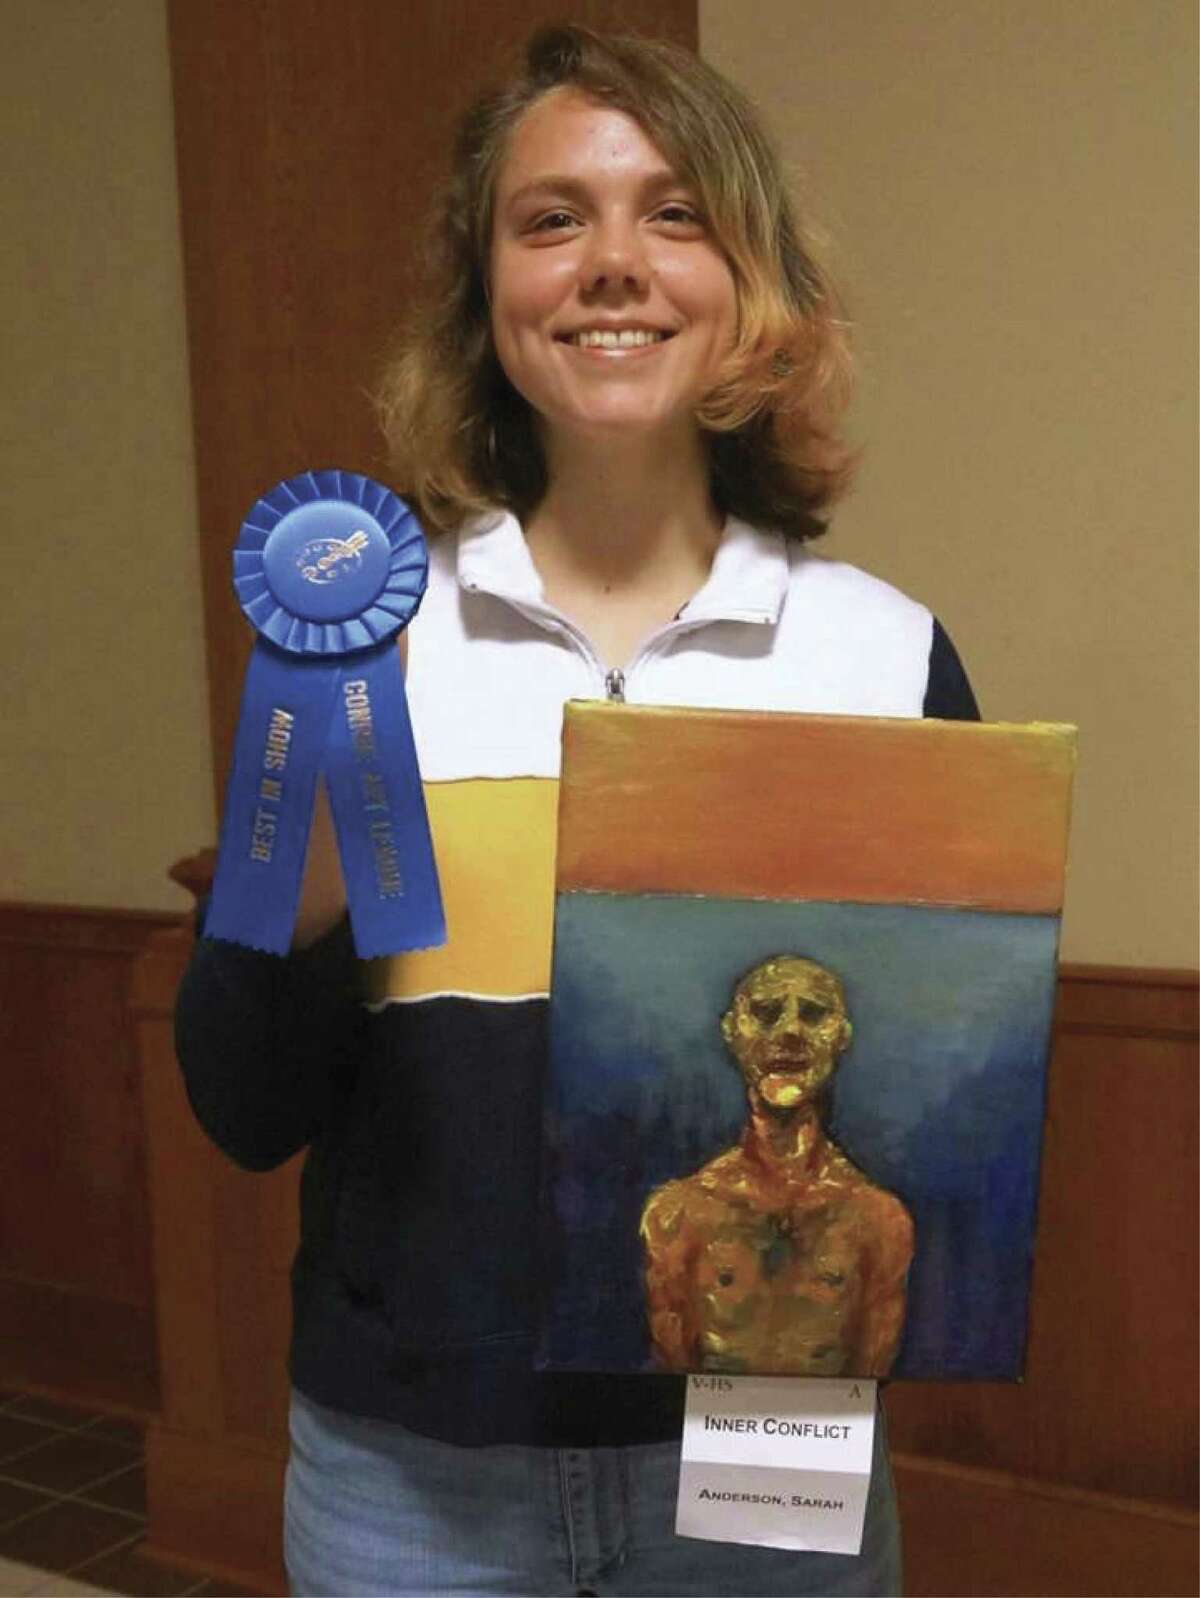 Conroe High School student Sarah Anderson, and her High School Best of Show award-winning oil painting, "Inner Conflict," which will be on display at the Gallery at the Madeley Building throughout October.